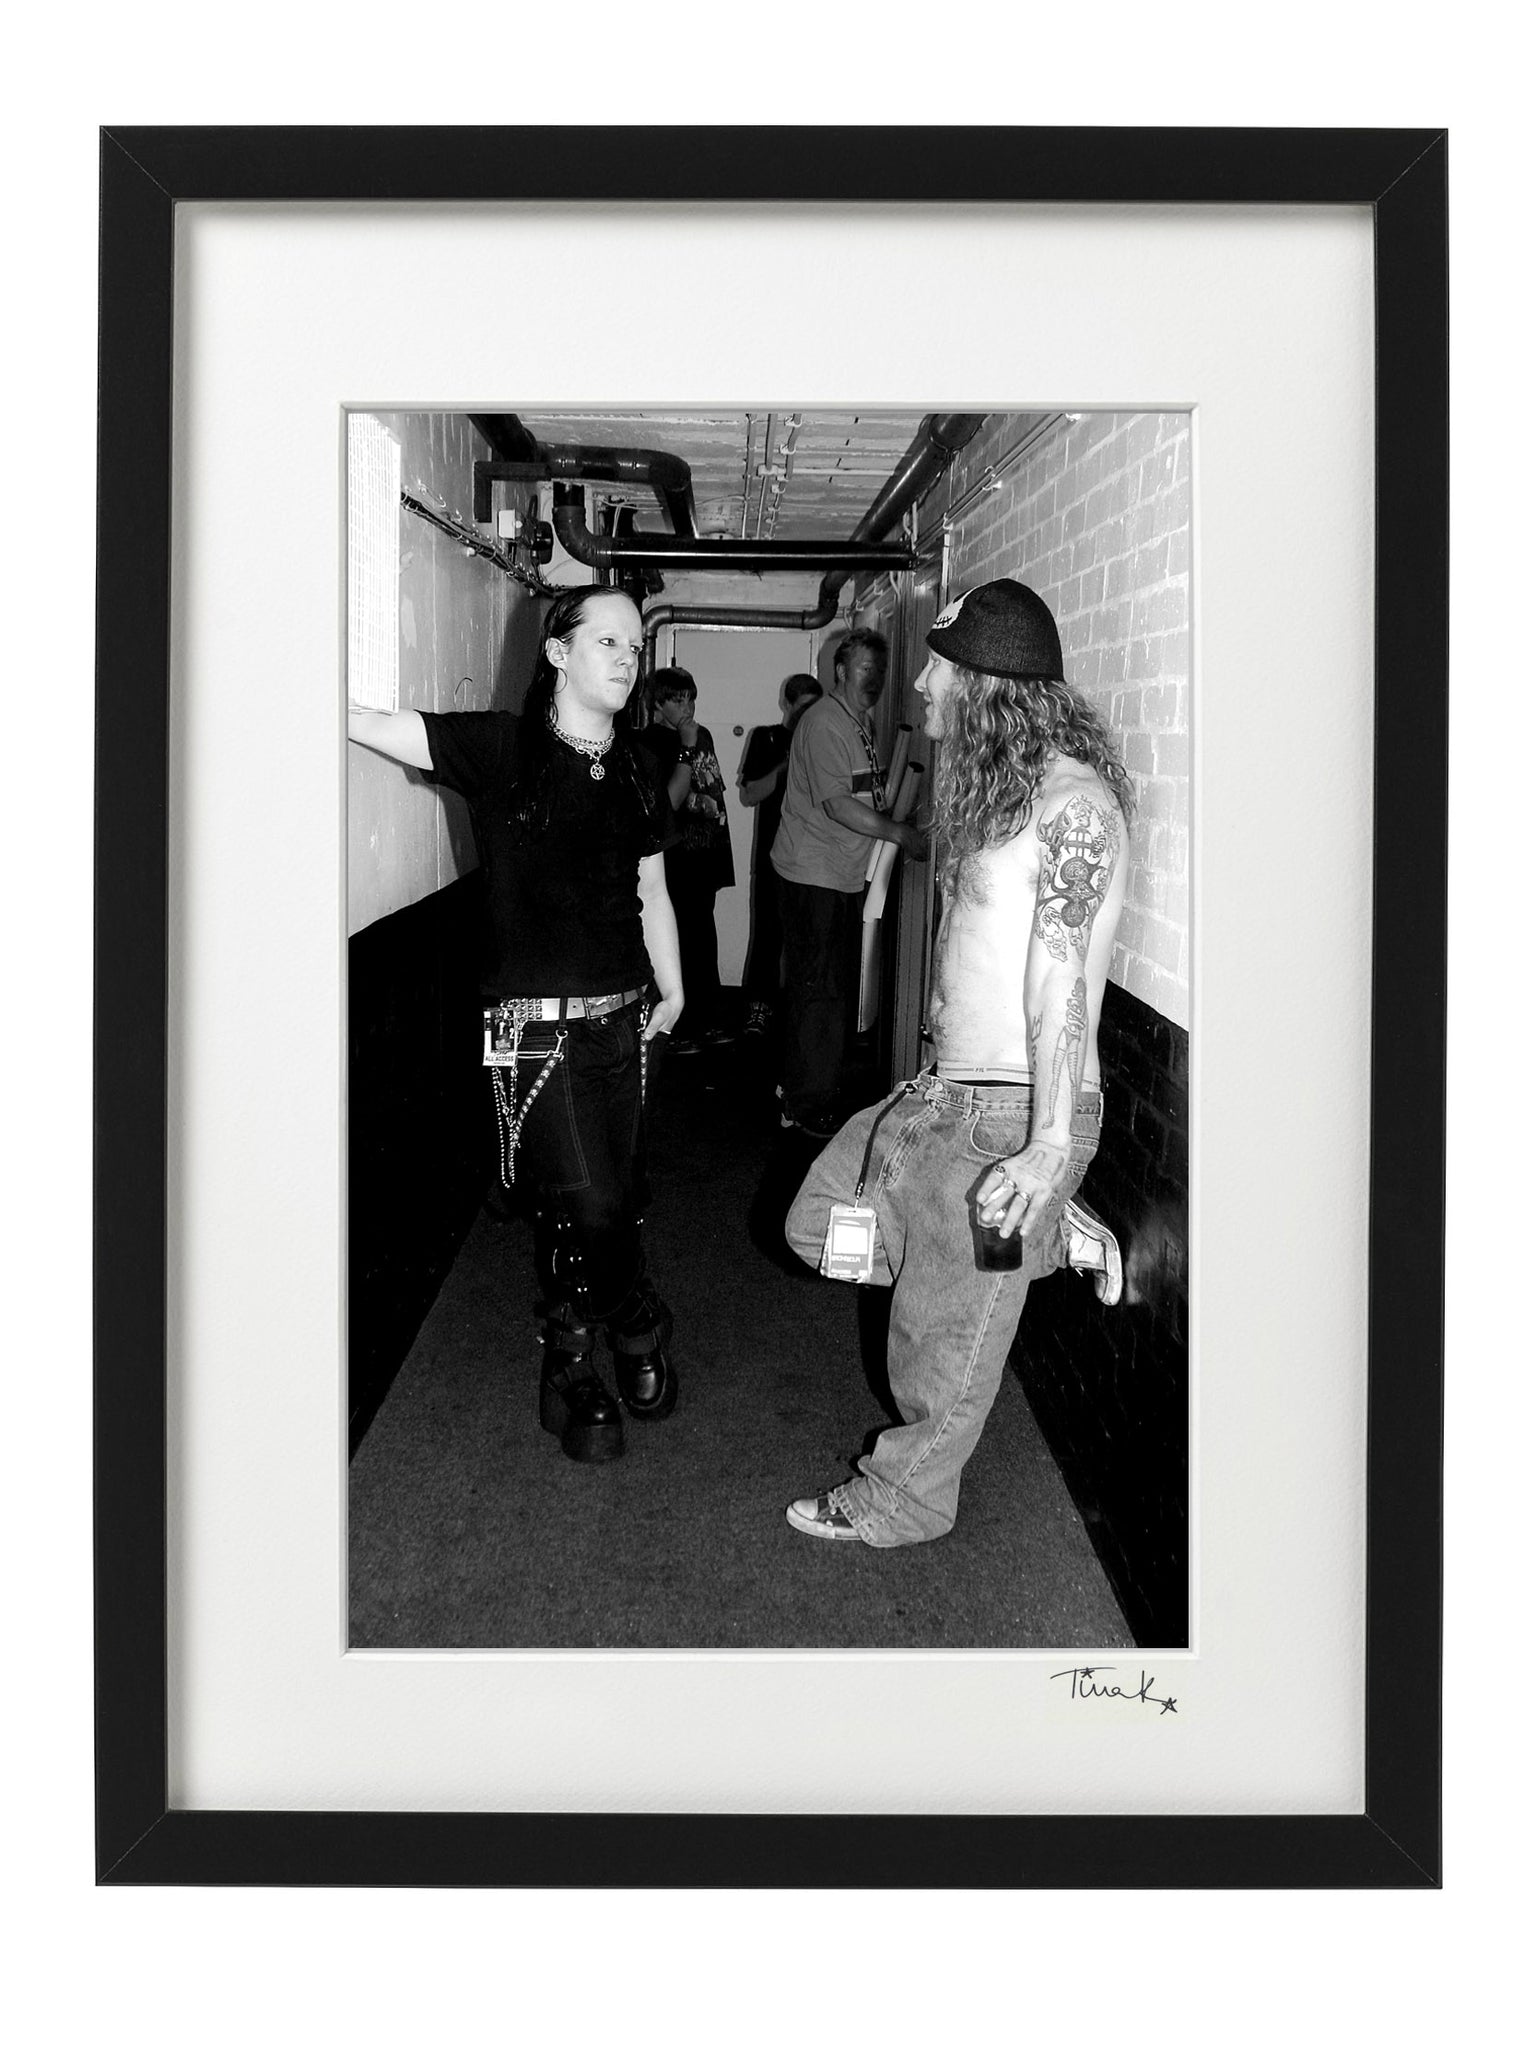 Joey Jordison (Slipknot founding drummer, Murderdolls) with Corey Taylor (Slipknot, Stone Sour) backstage at Birmingham Academy in 2003. Black and white framed print by Tina K Photography.